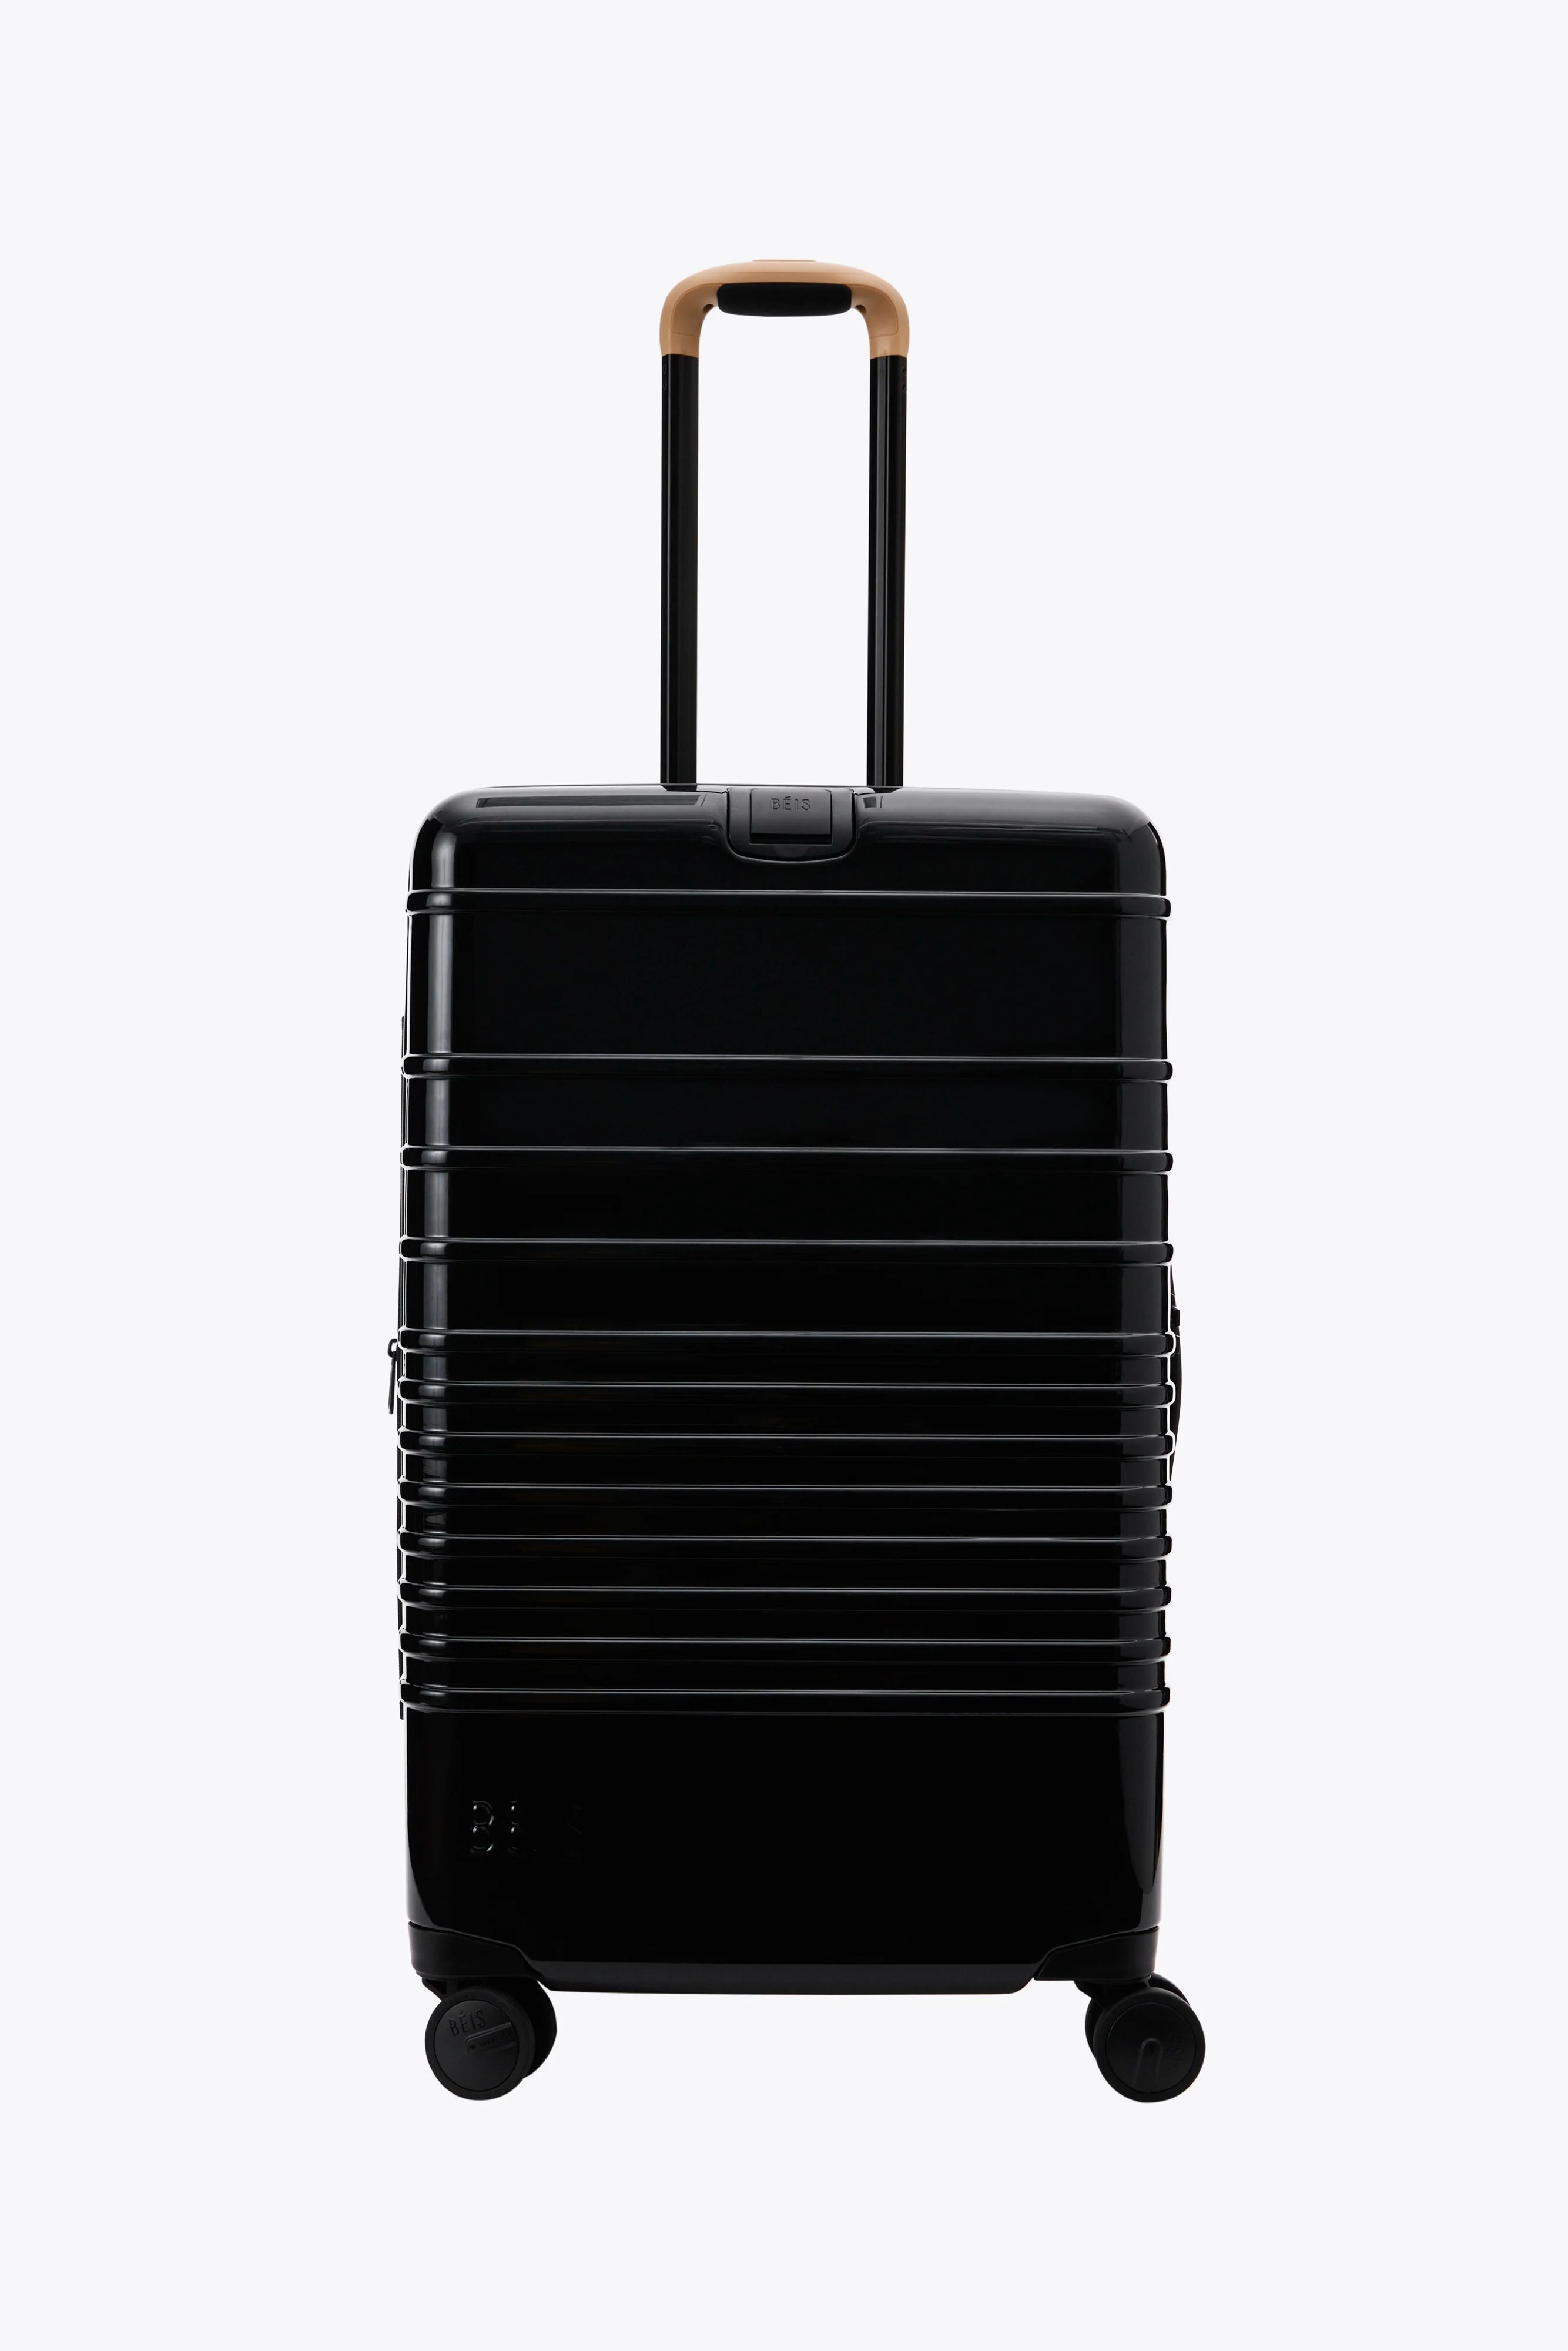 THE MEDIUM CHECK-IN ROLLER IN GLOSSY BLACK | BÉIS Travel